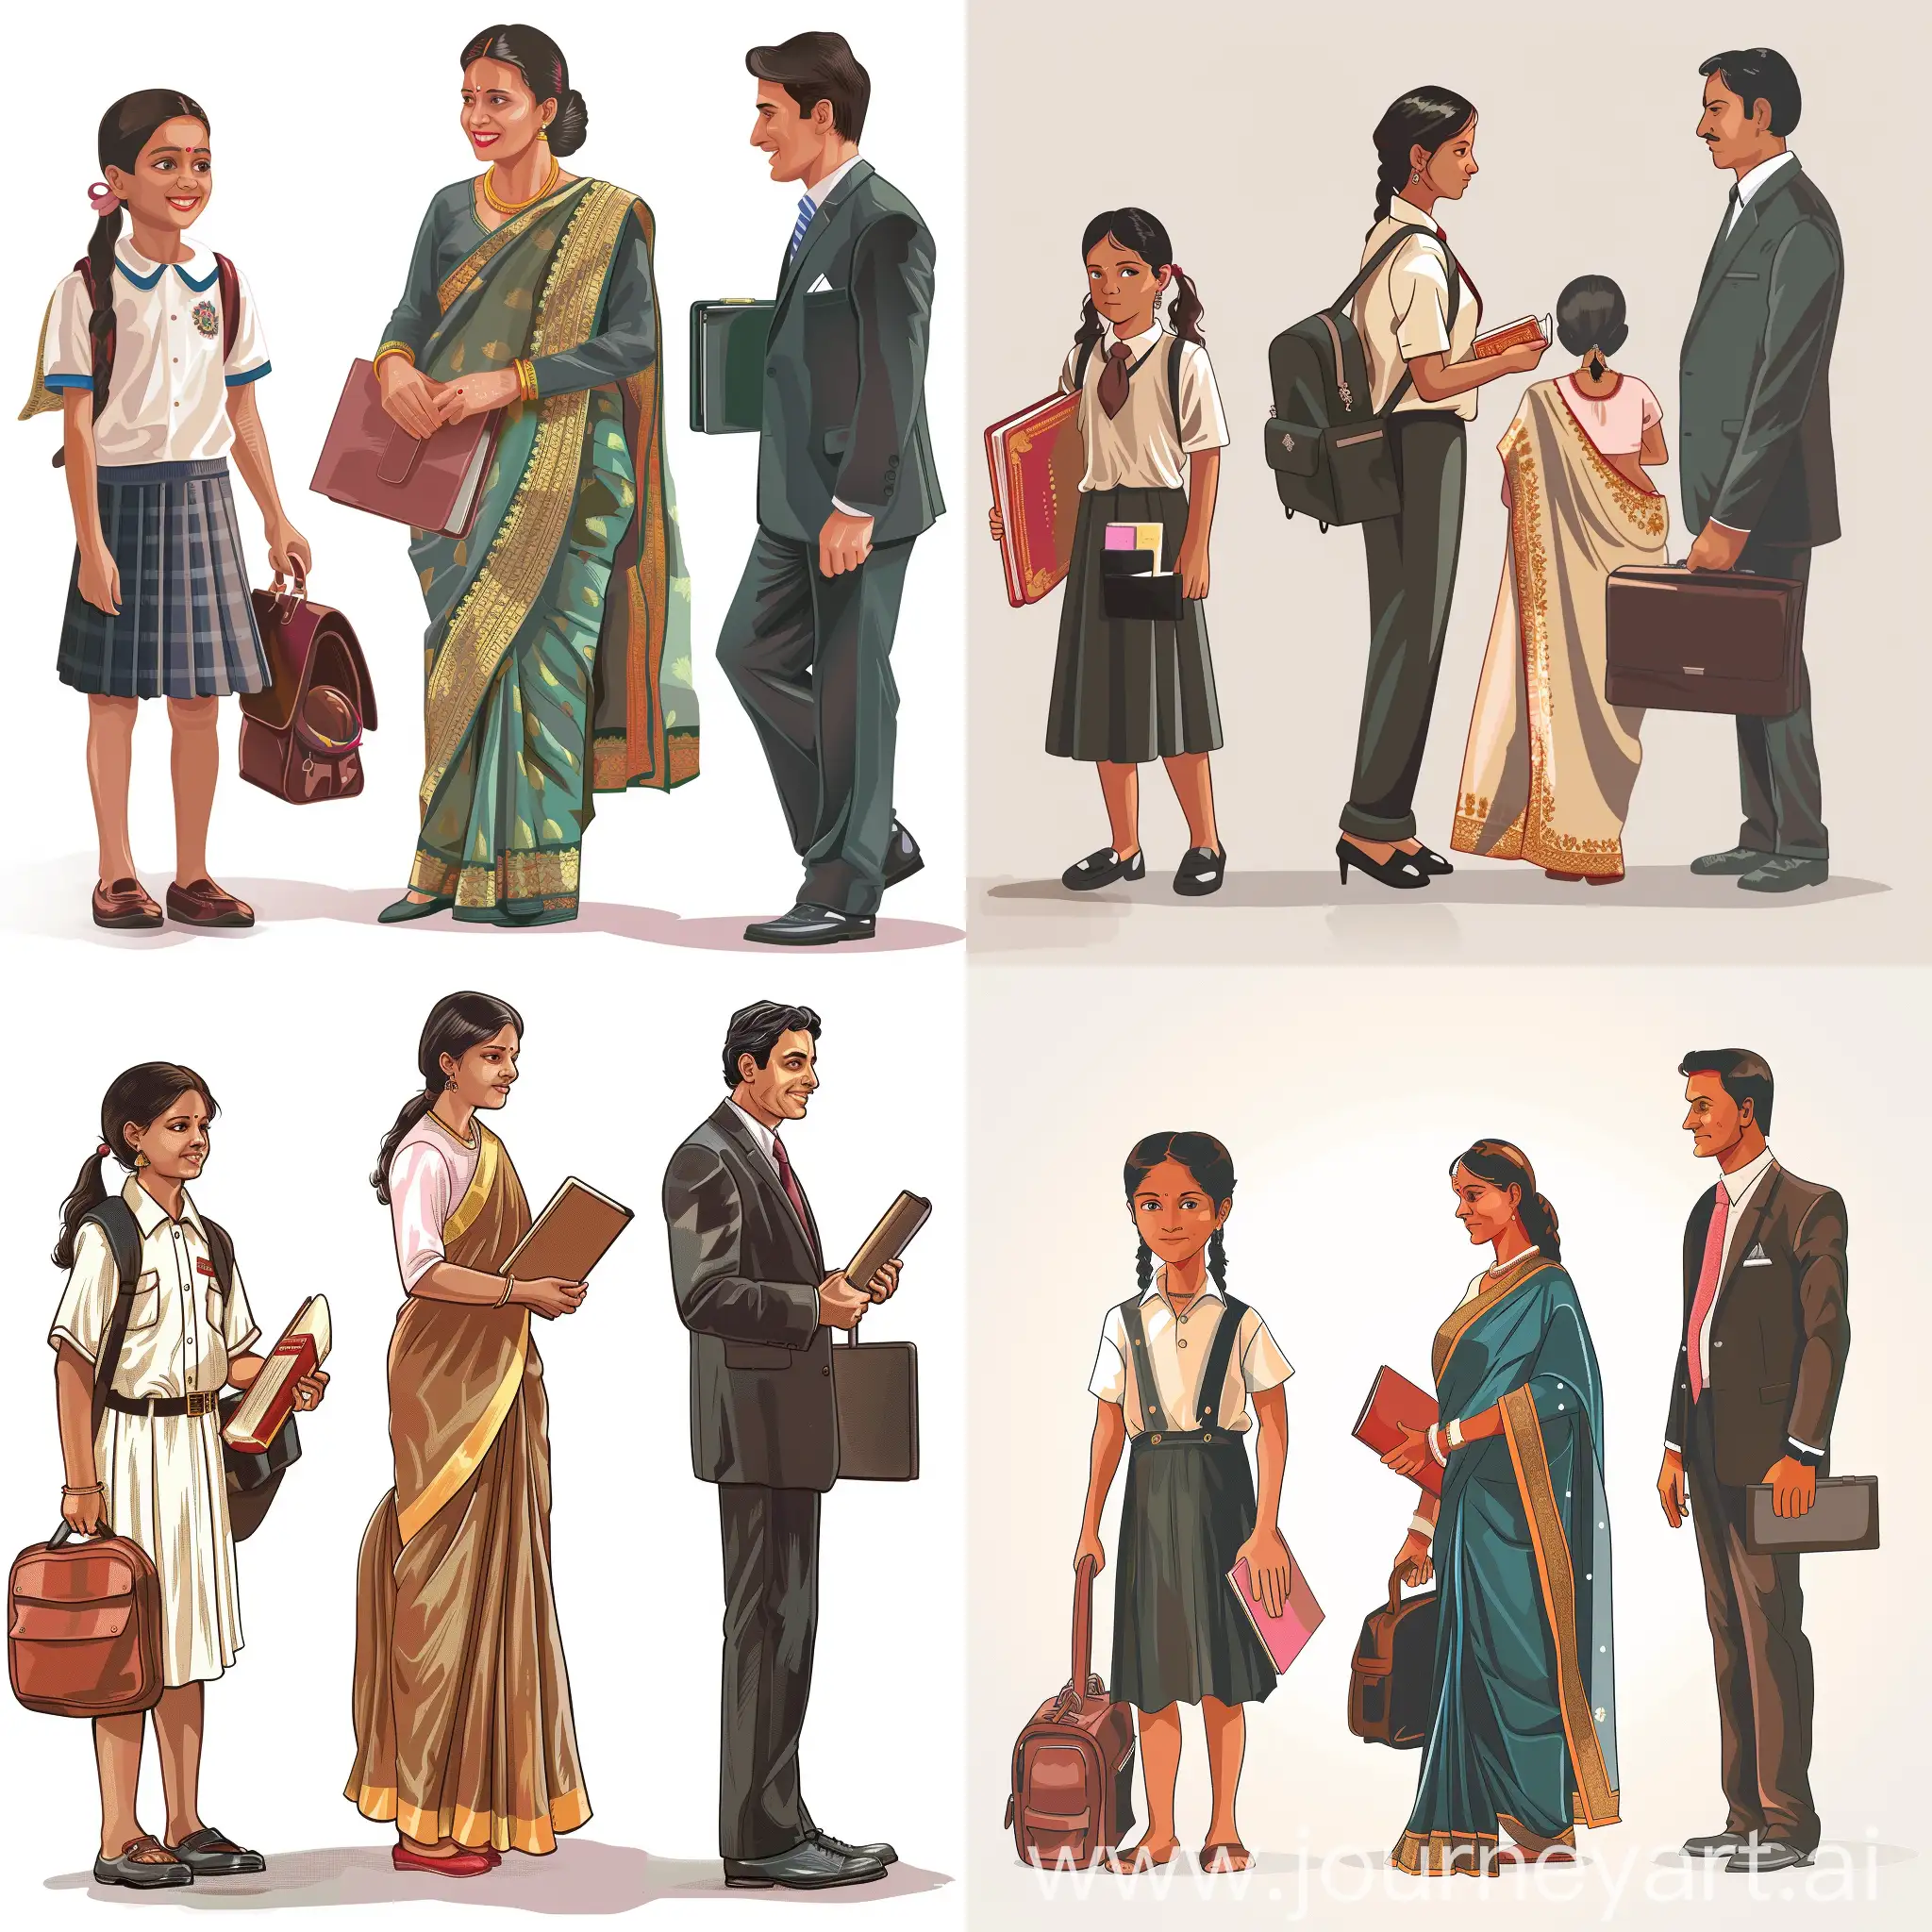 "Generate a detailed image portraying three Indian characters in one scene :  1. A school girl (5-10 years old) in a traditional uniform, holding a book or backpack.  2. A housewife (early 30s) in a saree or salwar kameez, engaged in household activities.  3. A professional man (early to mid-30s) in formal attire with a briefcase.  Ensure cultural accuracy and sensitivity, depicting their roles and environments authentically."